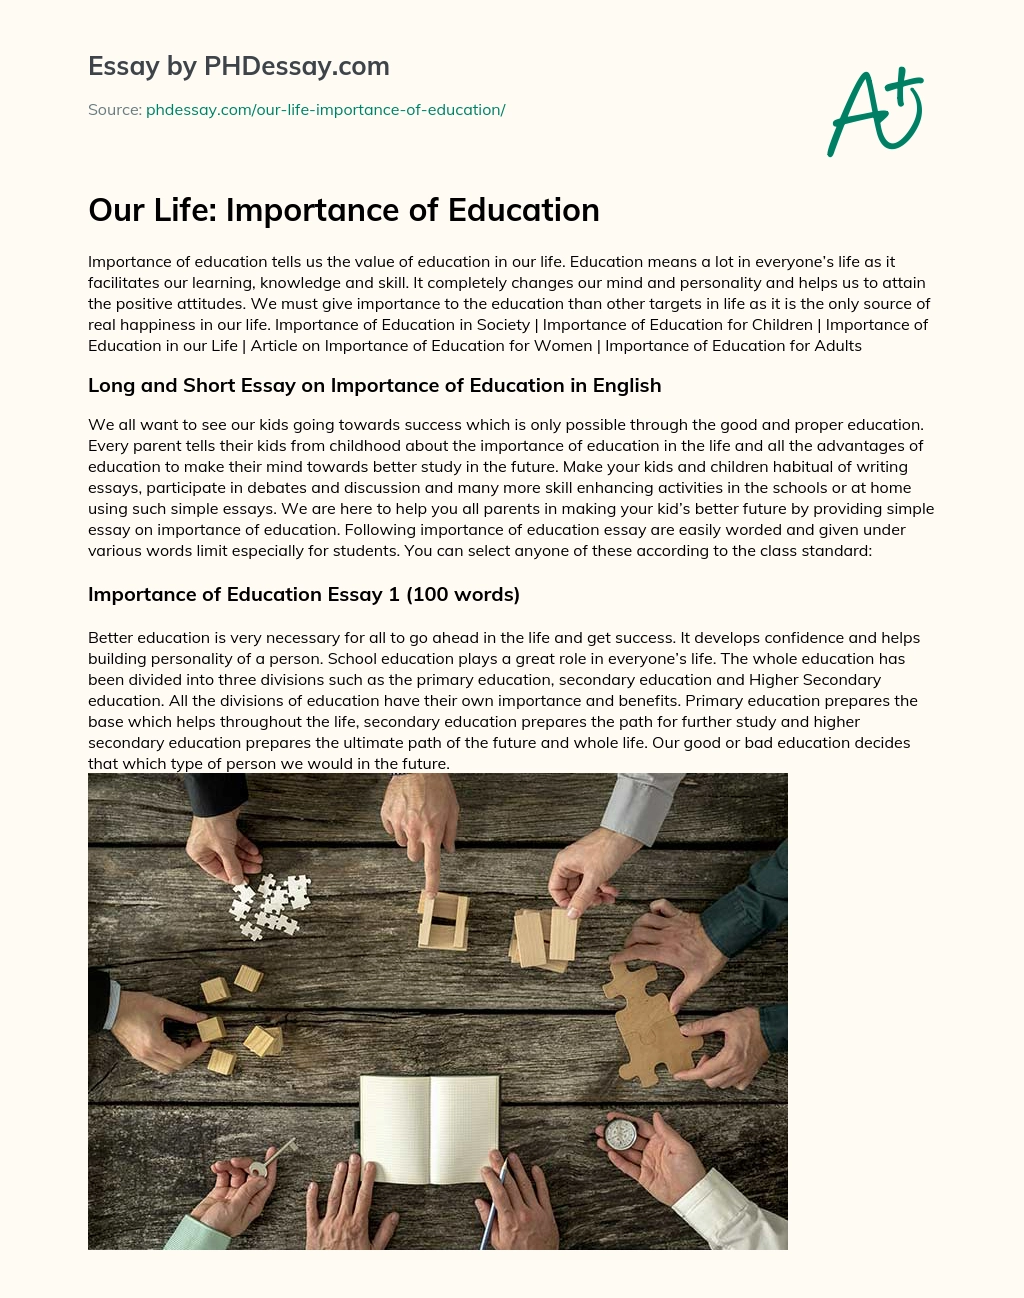 Our Life: Importance of Education essay